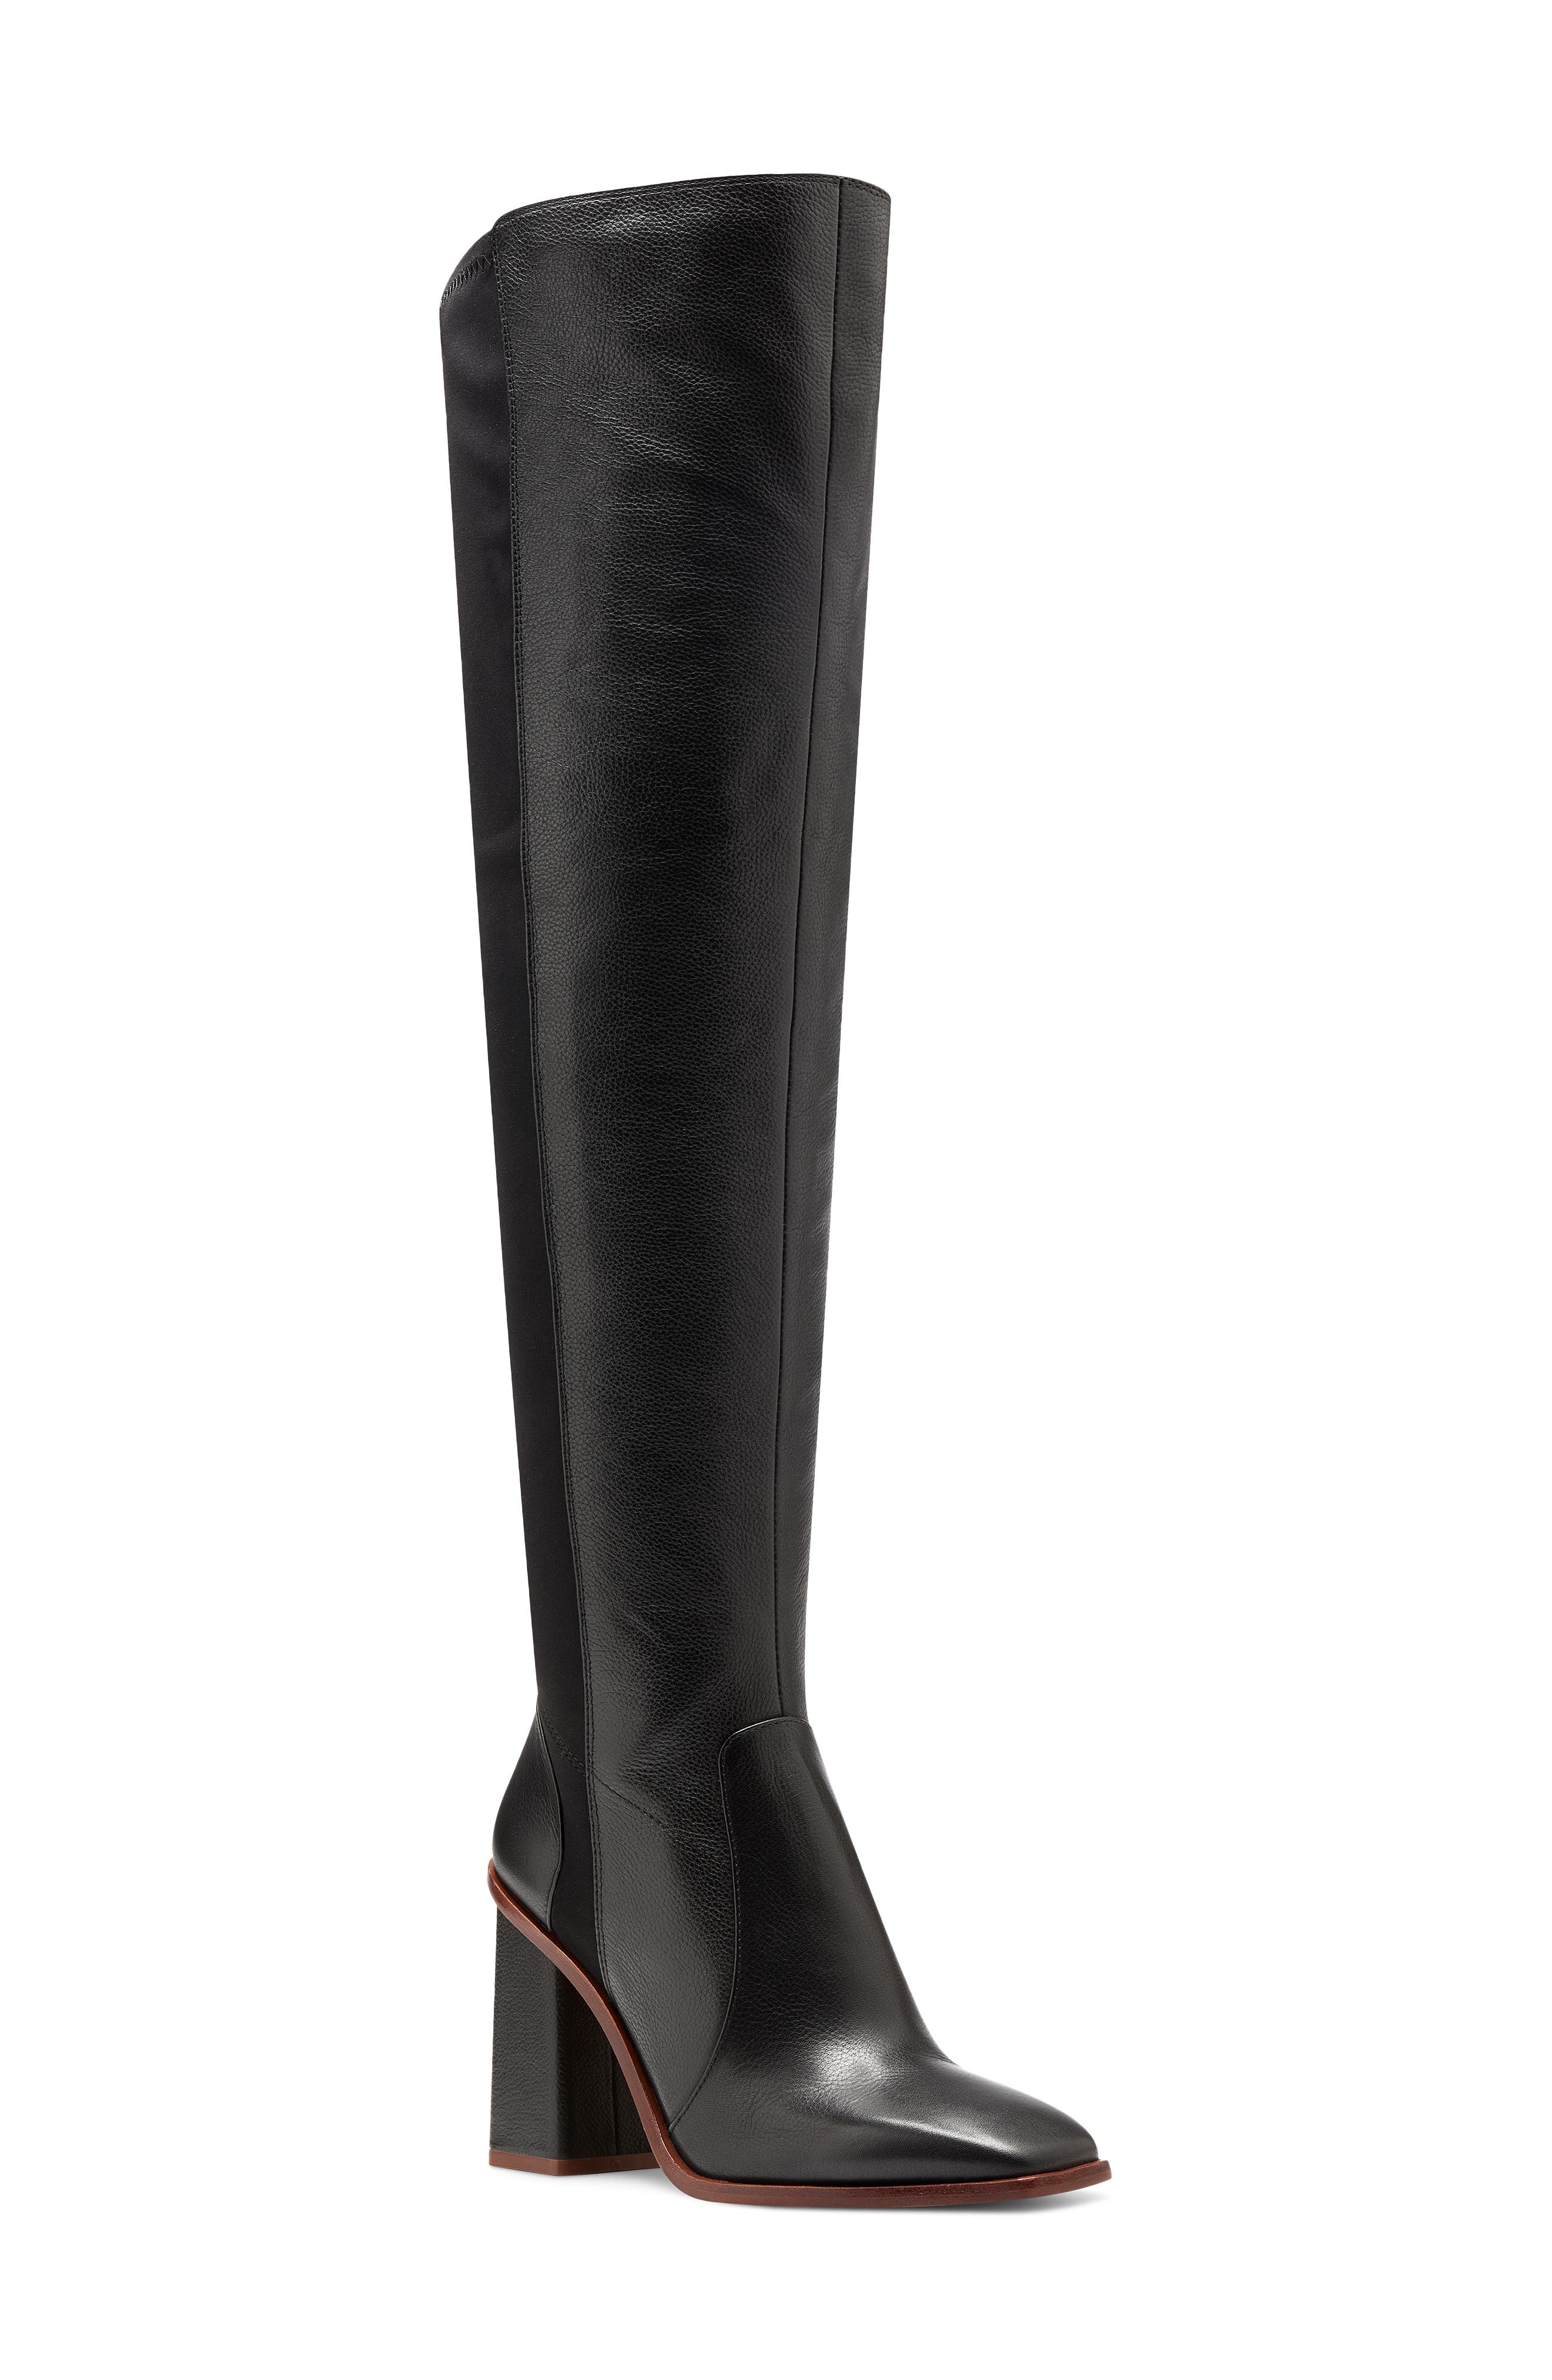 UPC 194307349525 product image for Women's Vince Camuto Dreven Over The Knee Boot, Size 5.5 M - Black | upcitemdb.com